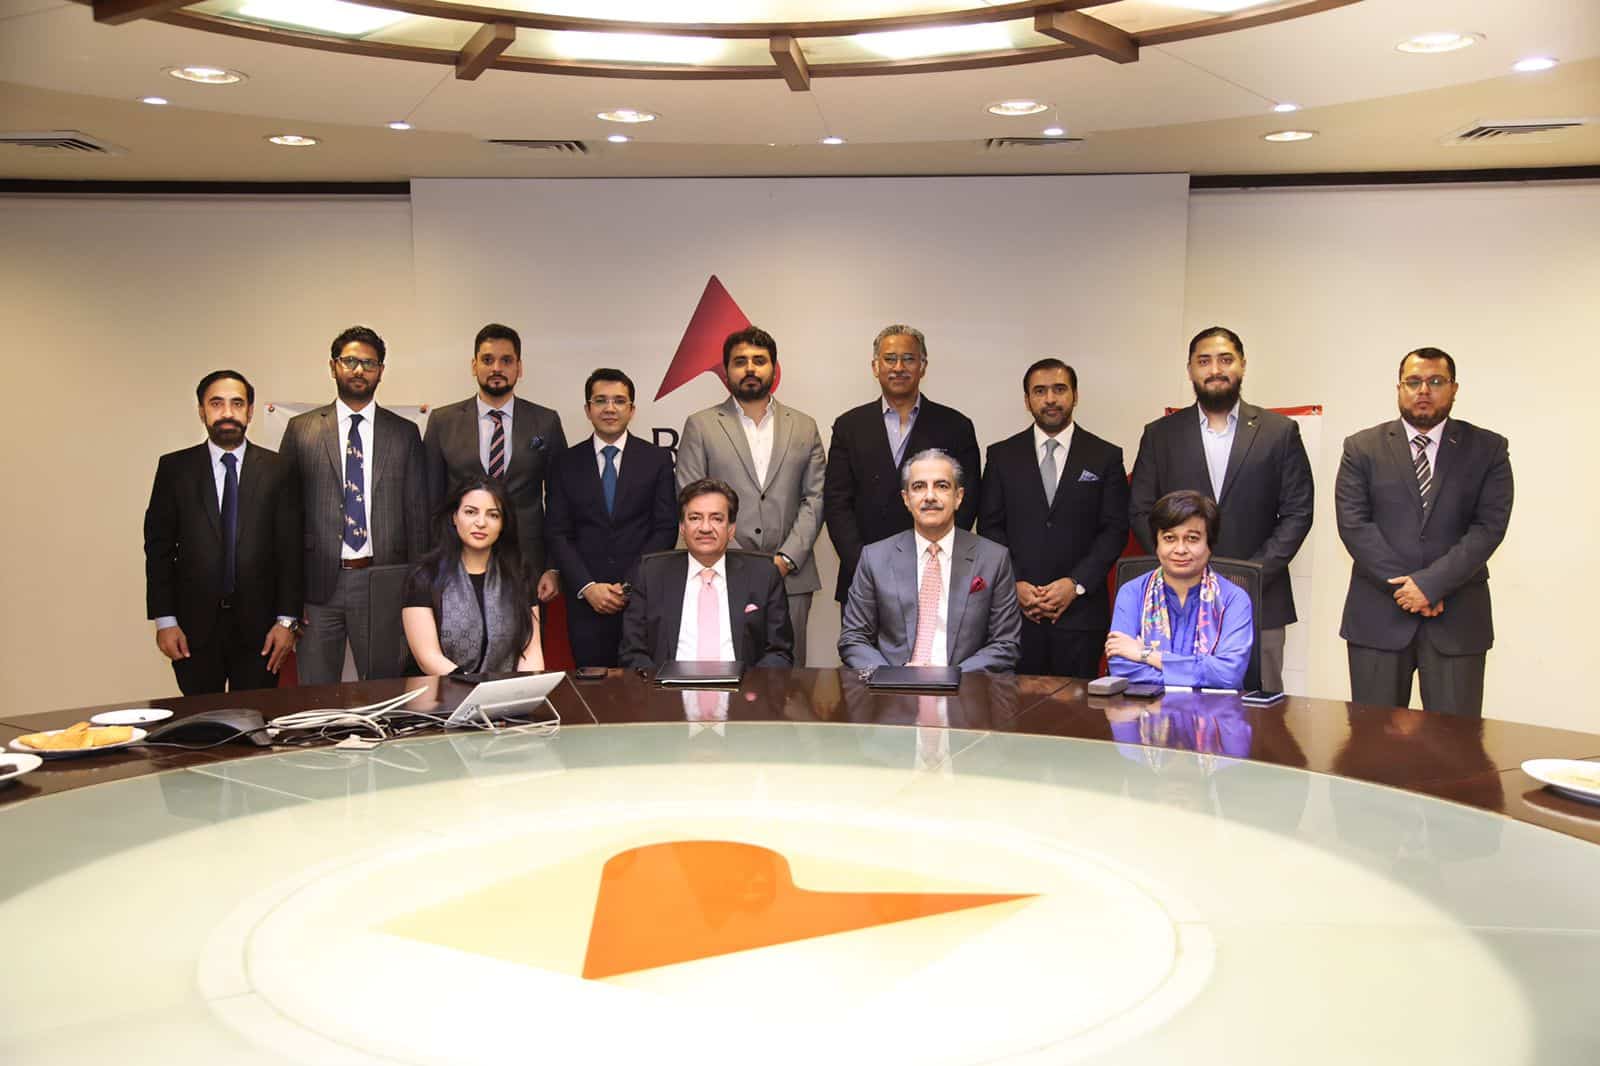 Bank Alfalah and Alfalah Insurance in collaboration with Fidelity Insurance Brokers inked a memorandum of understanding to provide International Health Insurance "GlobalCare" to their prestigious clients in Pakistan